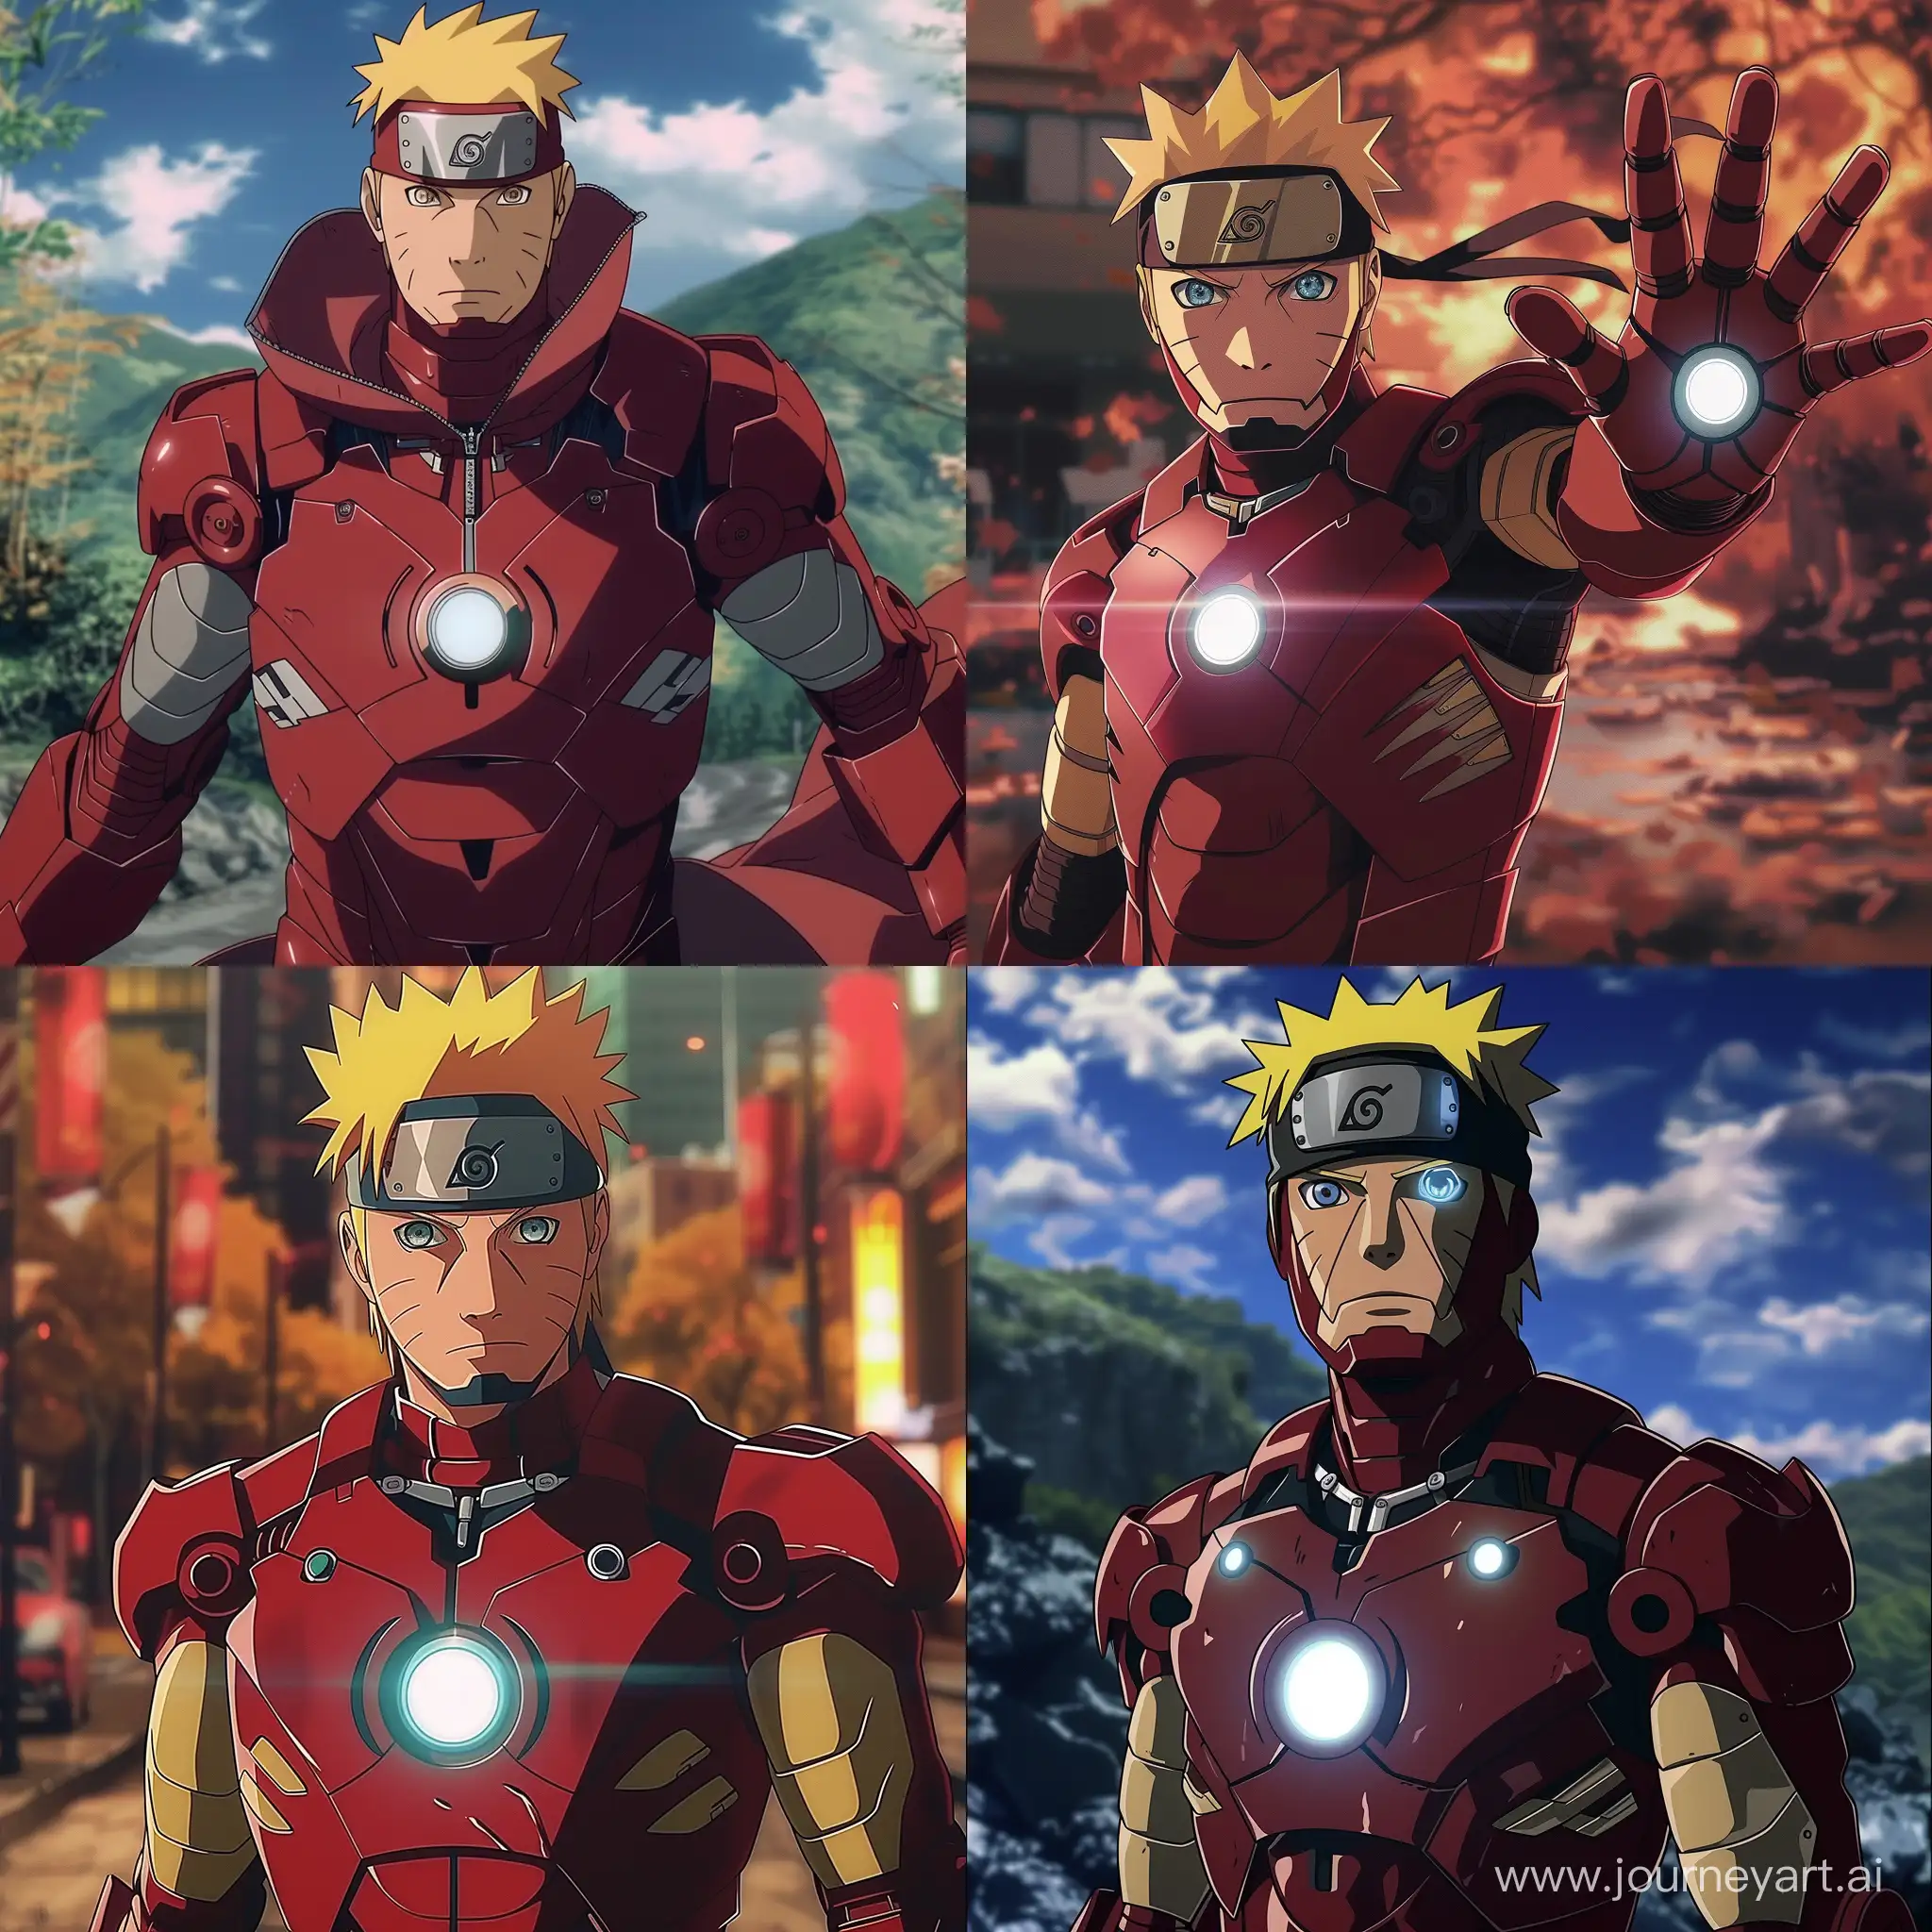 Iron-Man-Meets-Naruto-Epic-Crossover-Battle-in-Anime-Universe